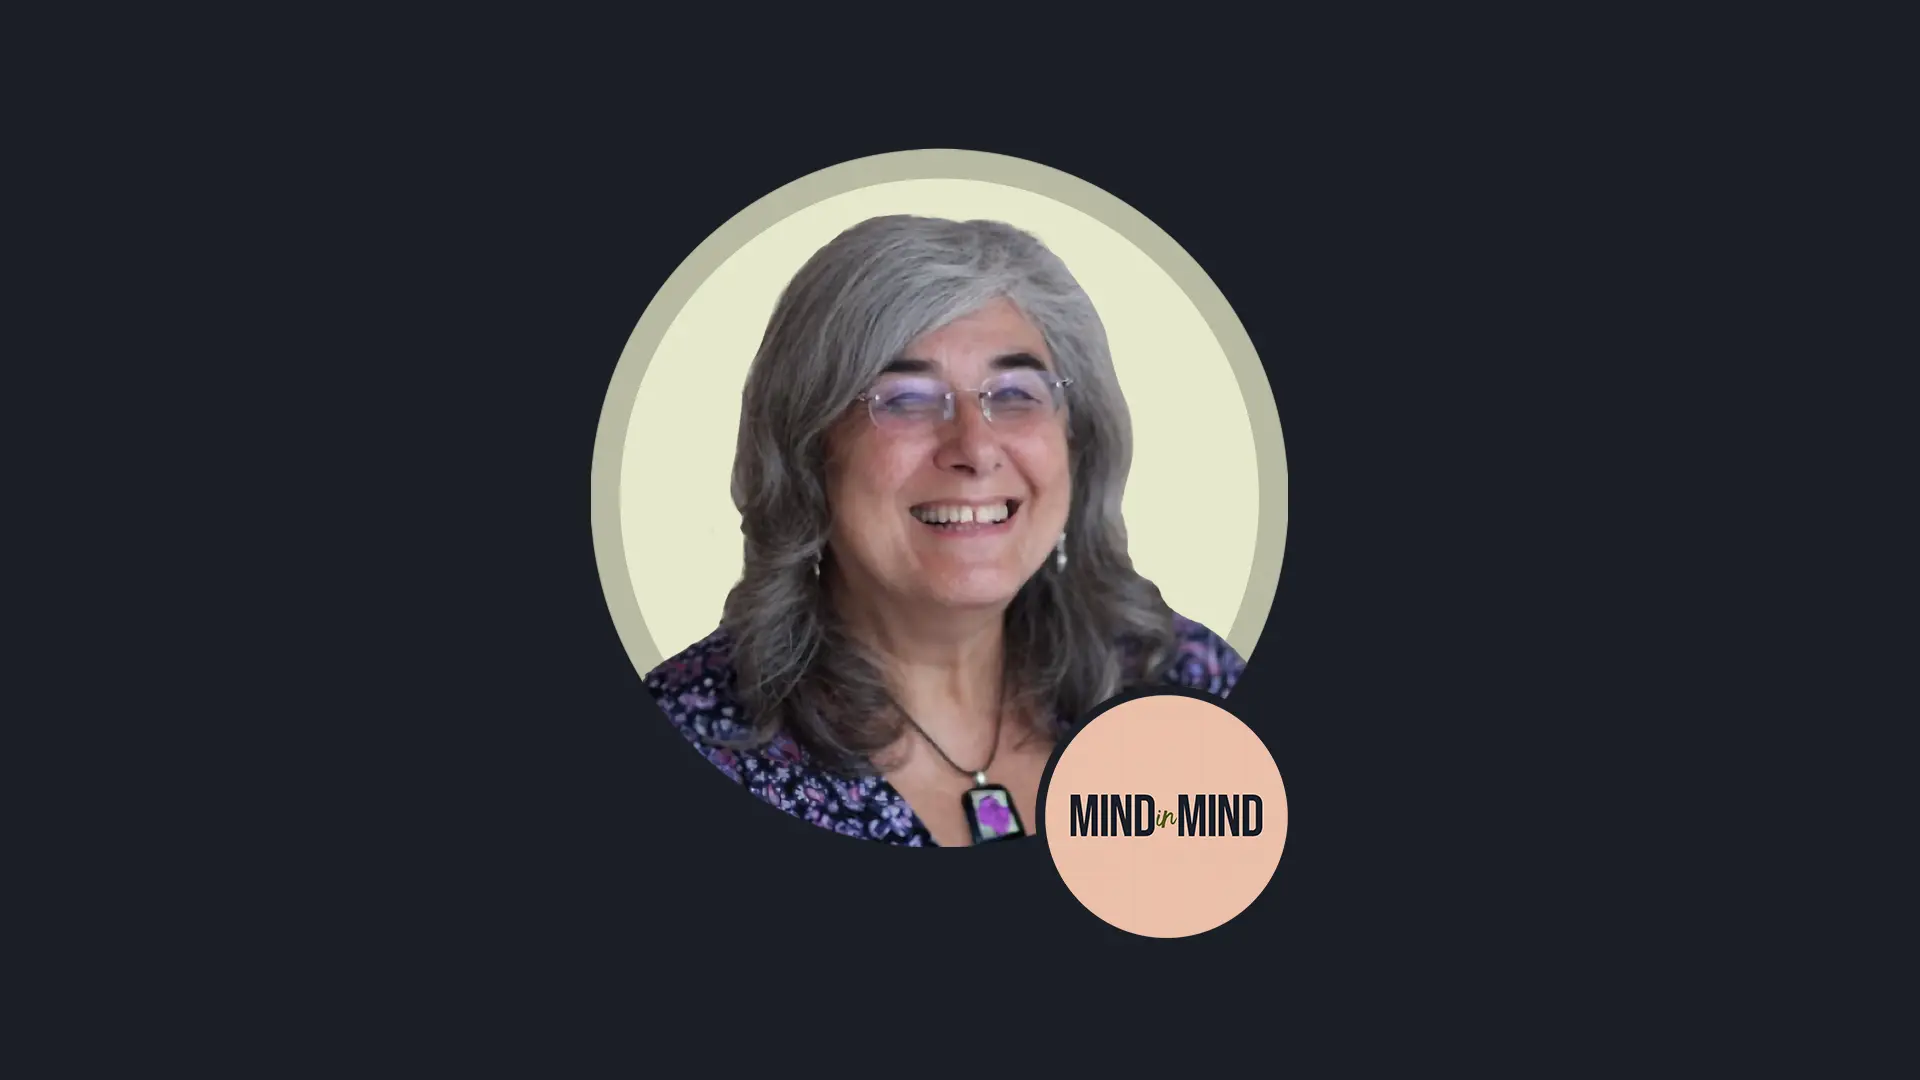 Dr Valerie Sinason photo in green circle background with MINDinMIND logo